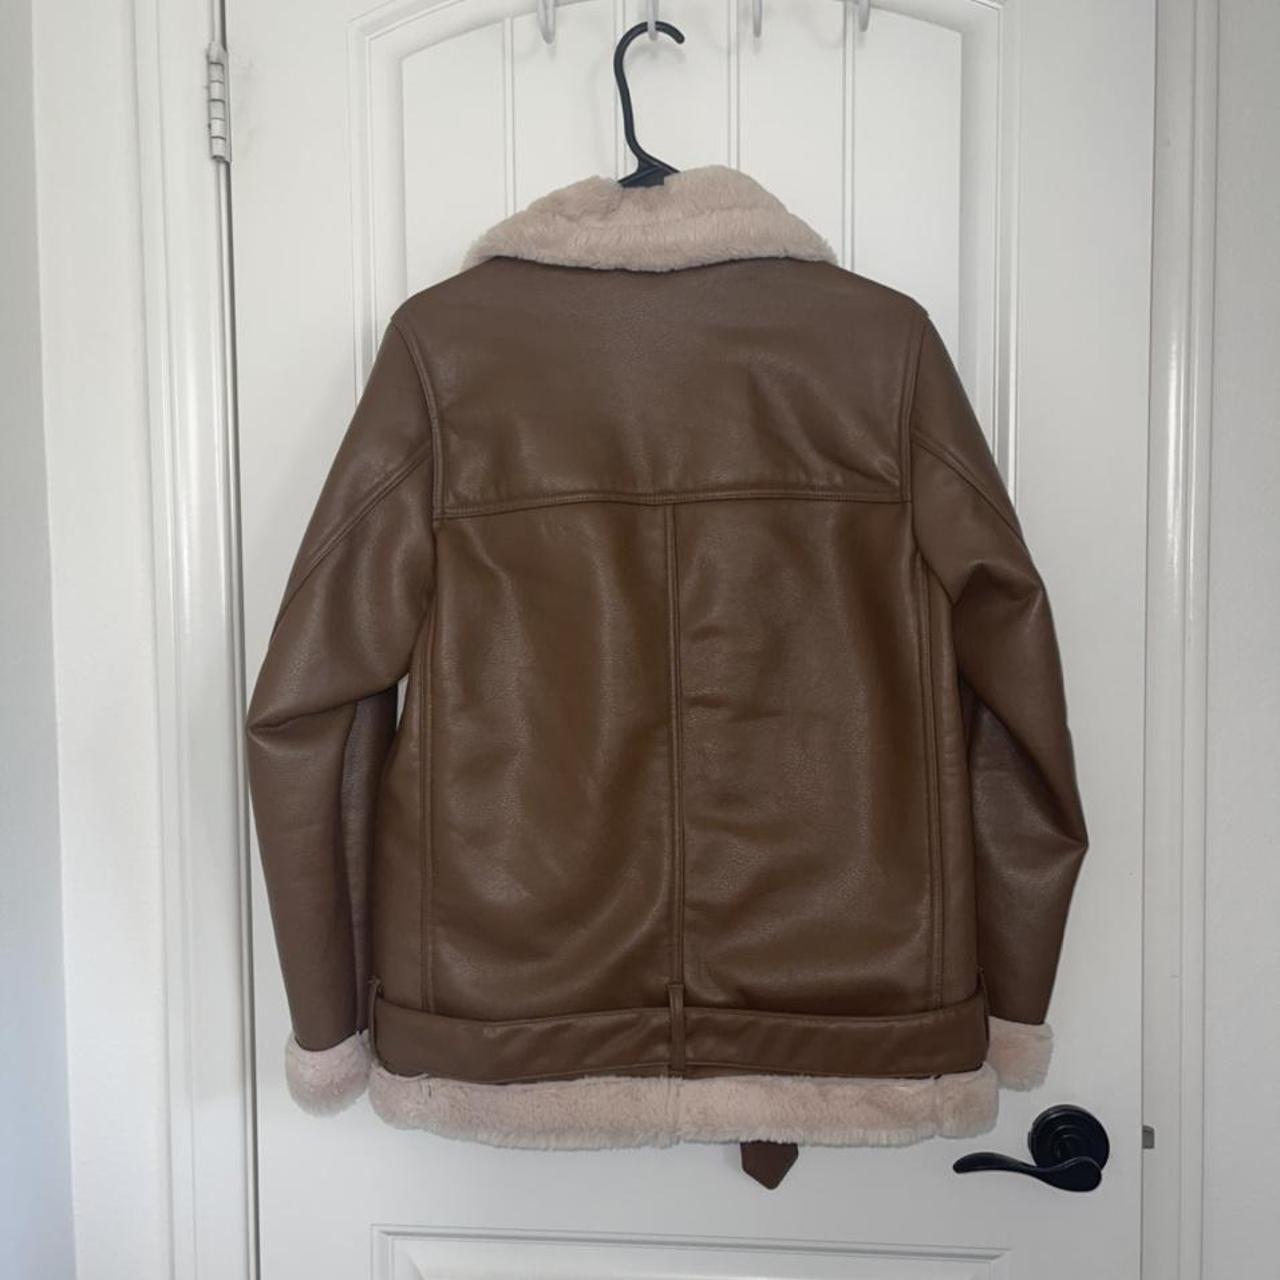 FAUX LEATHER BROWN JACKET/COAT With fur... - Depop